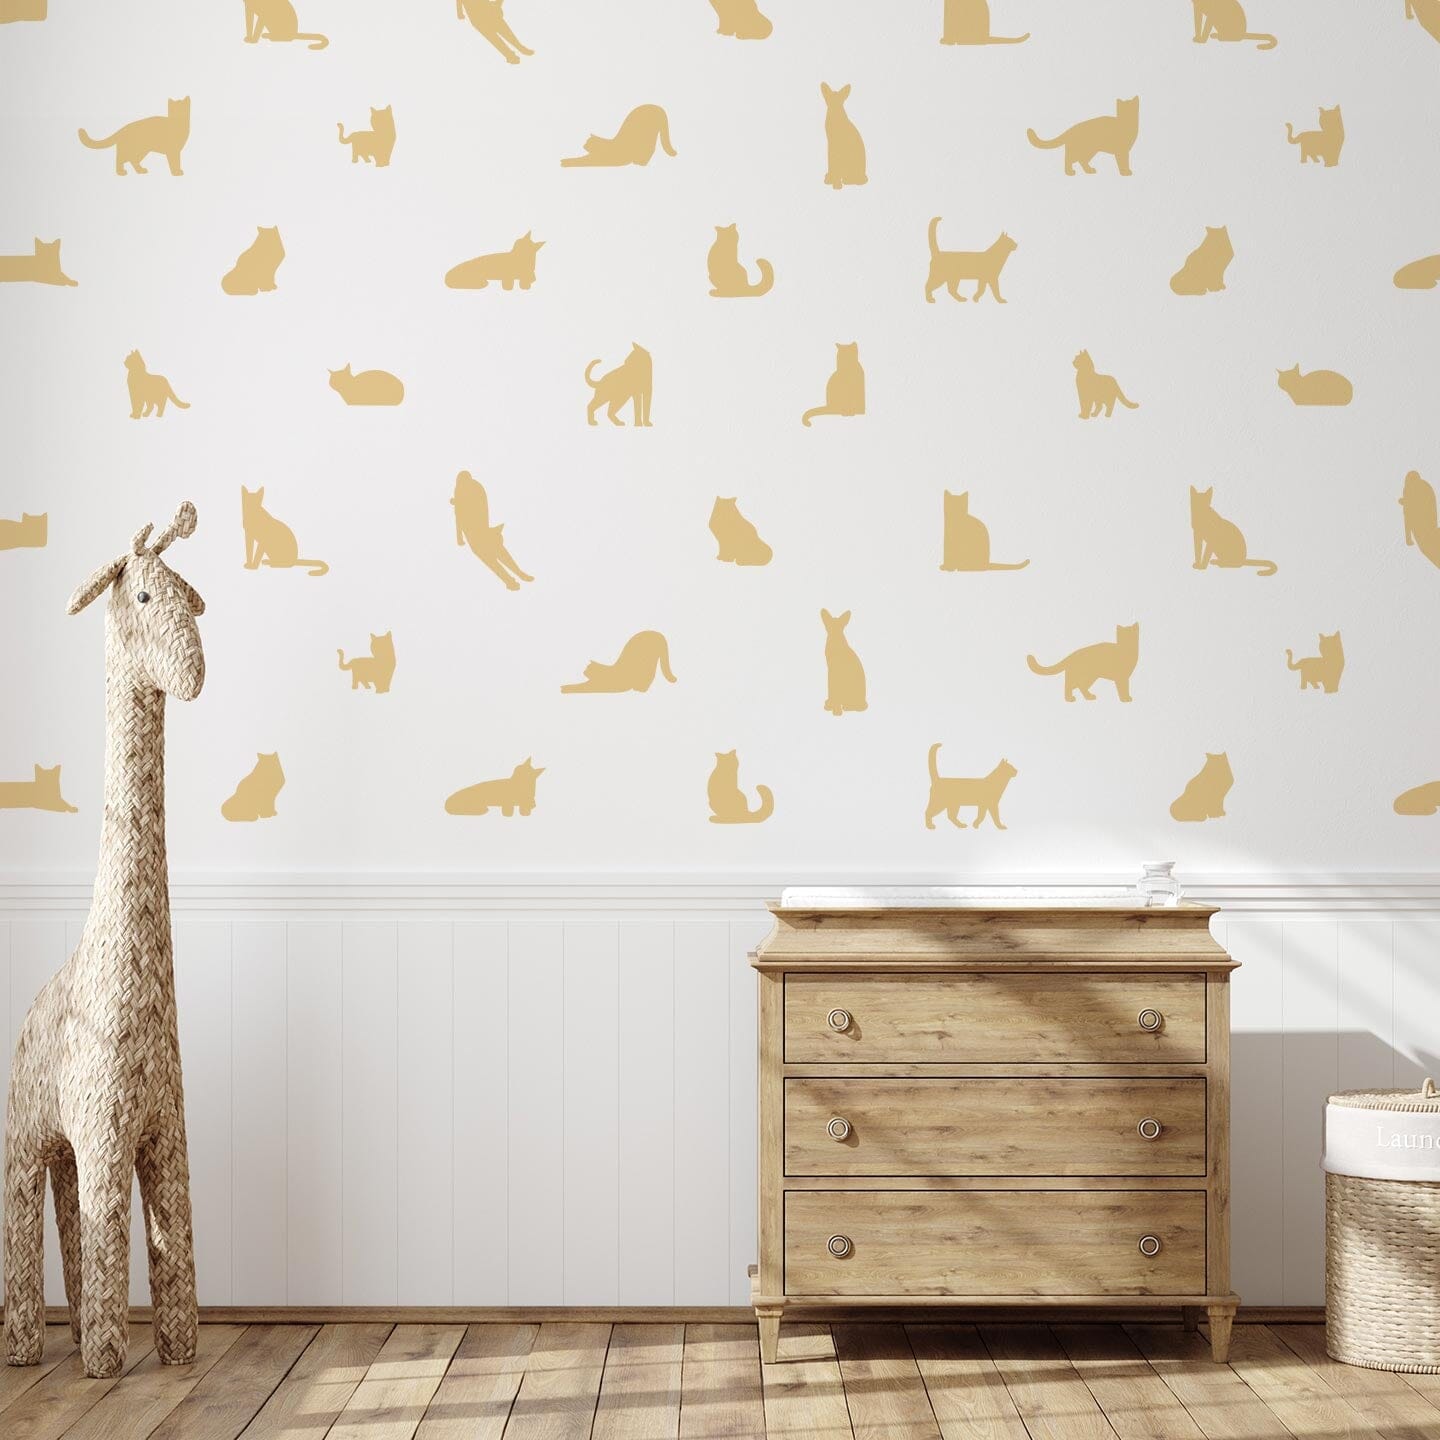 Cat Silhouette Wall Decals Decals Urbanwalls Maize 